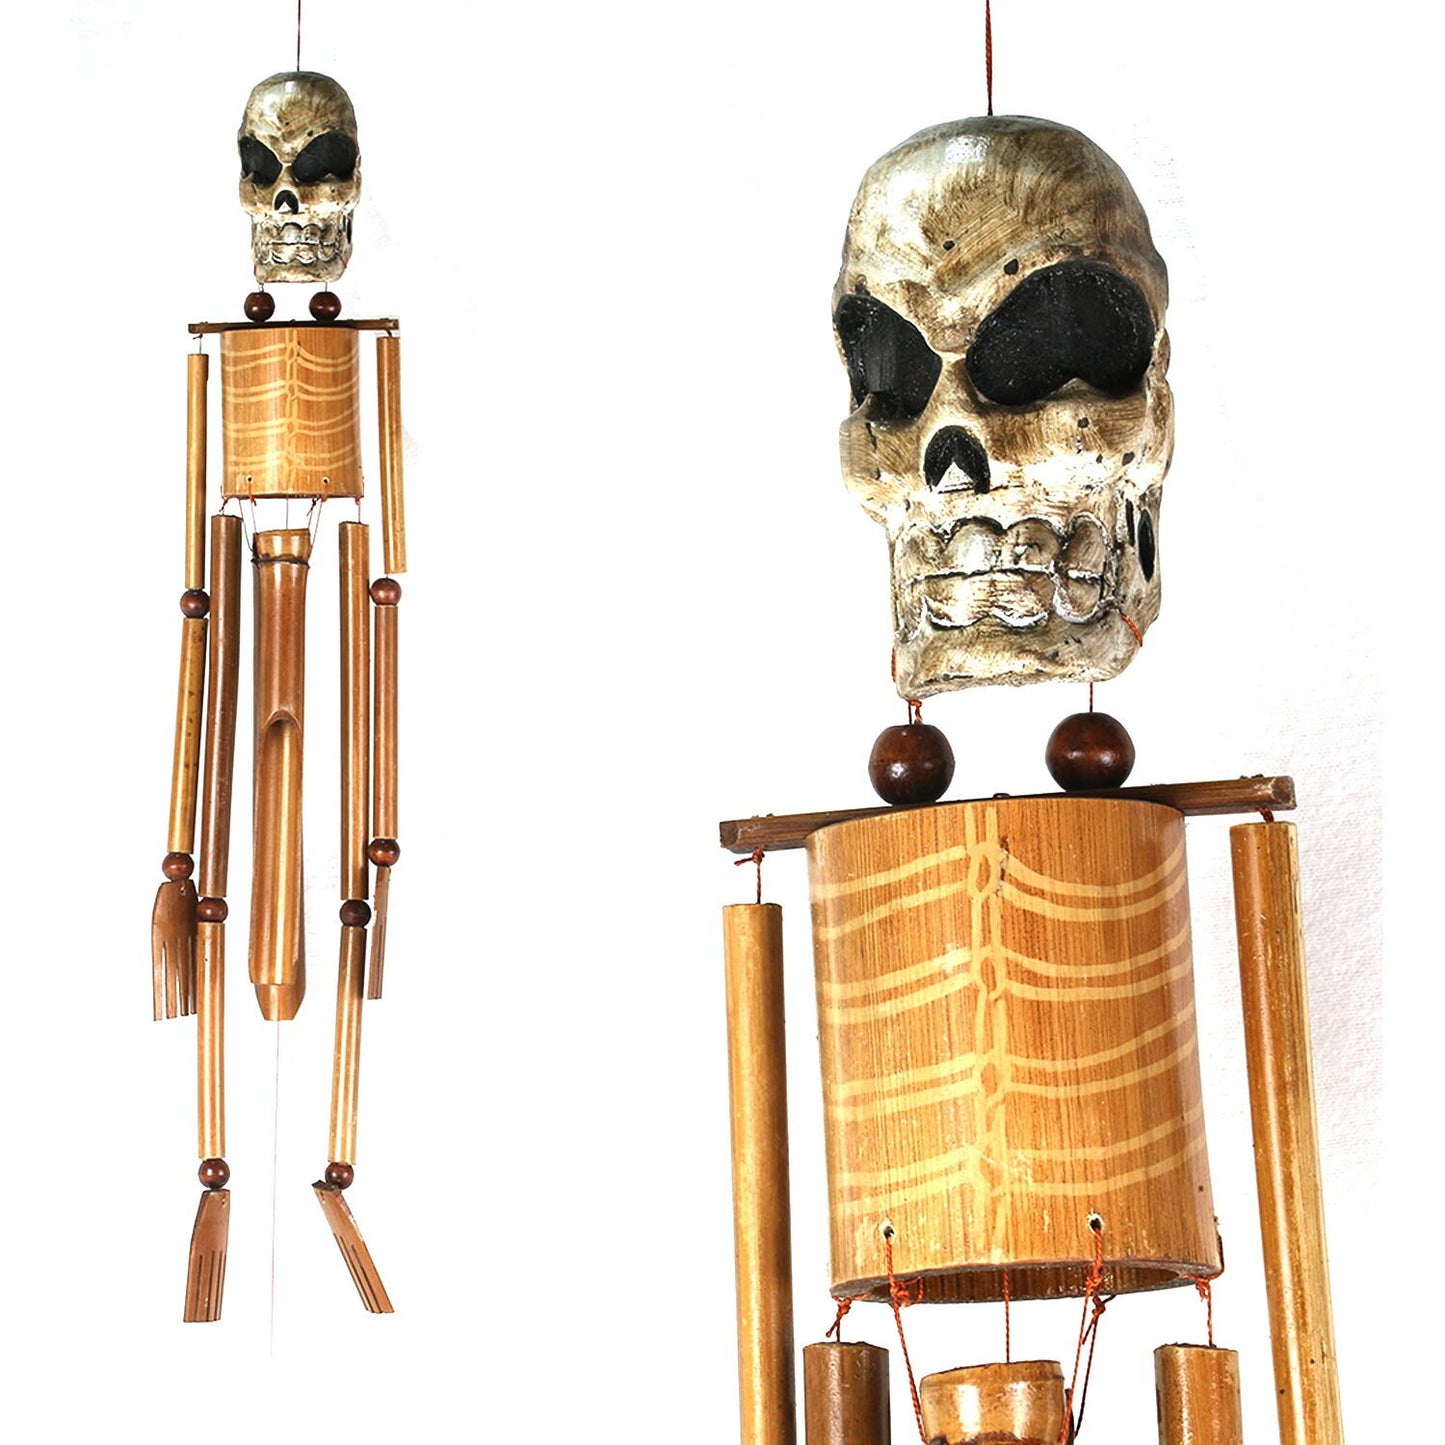 Wind Chime Mobile Chime Outdoor Indoor Skull - Skeleton made of wood and bamboo